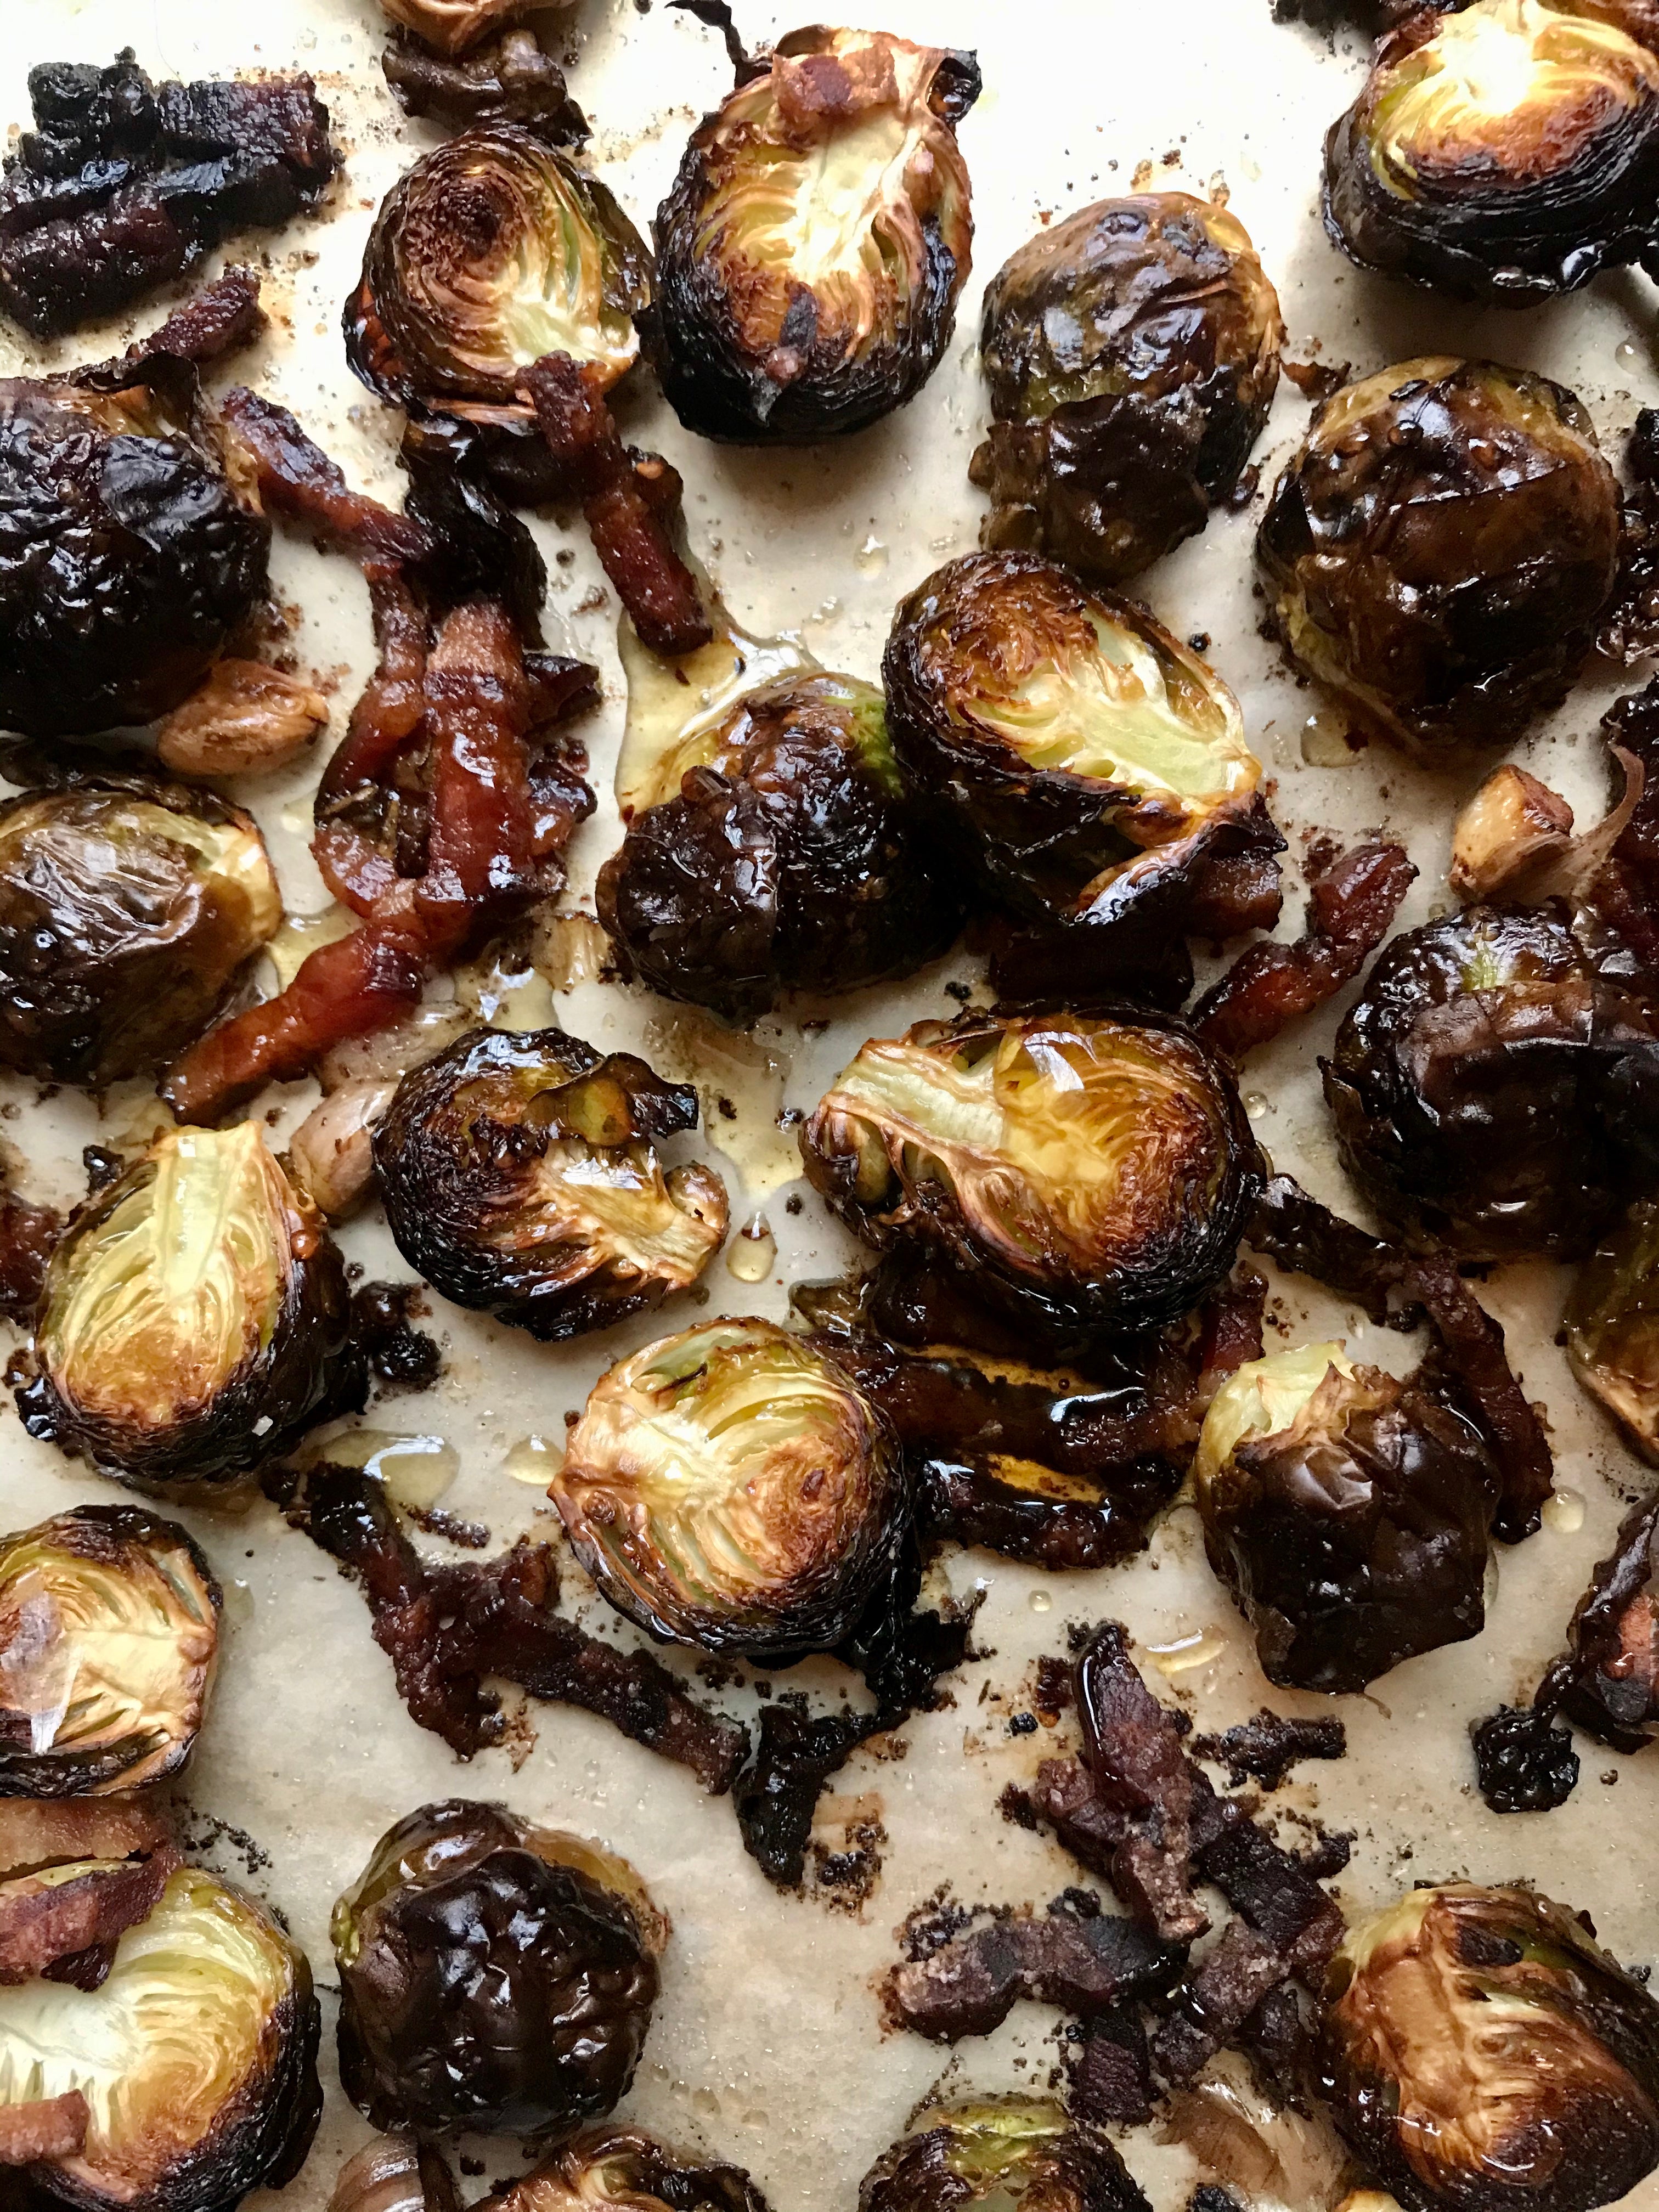 Roasted Brussels Sprouts With Bacon and Whiskey Barrel Aged Wildflower Honey